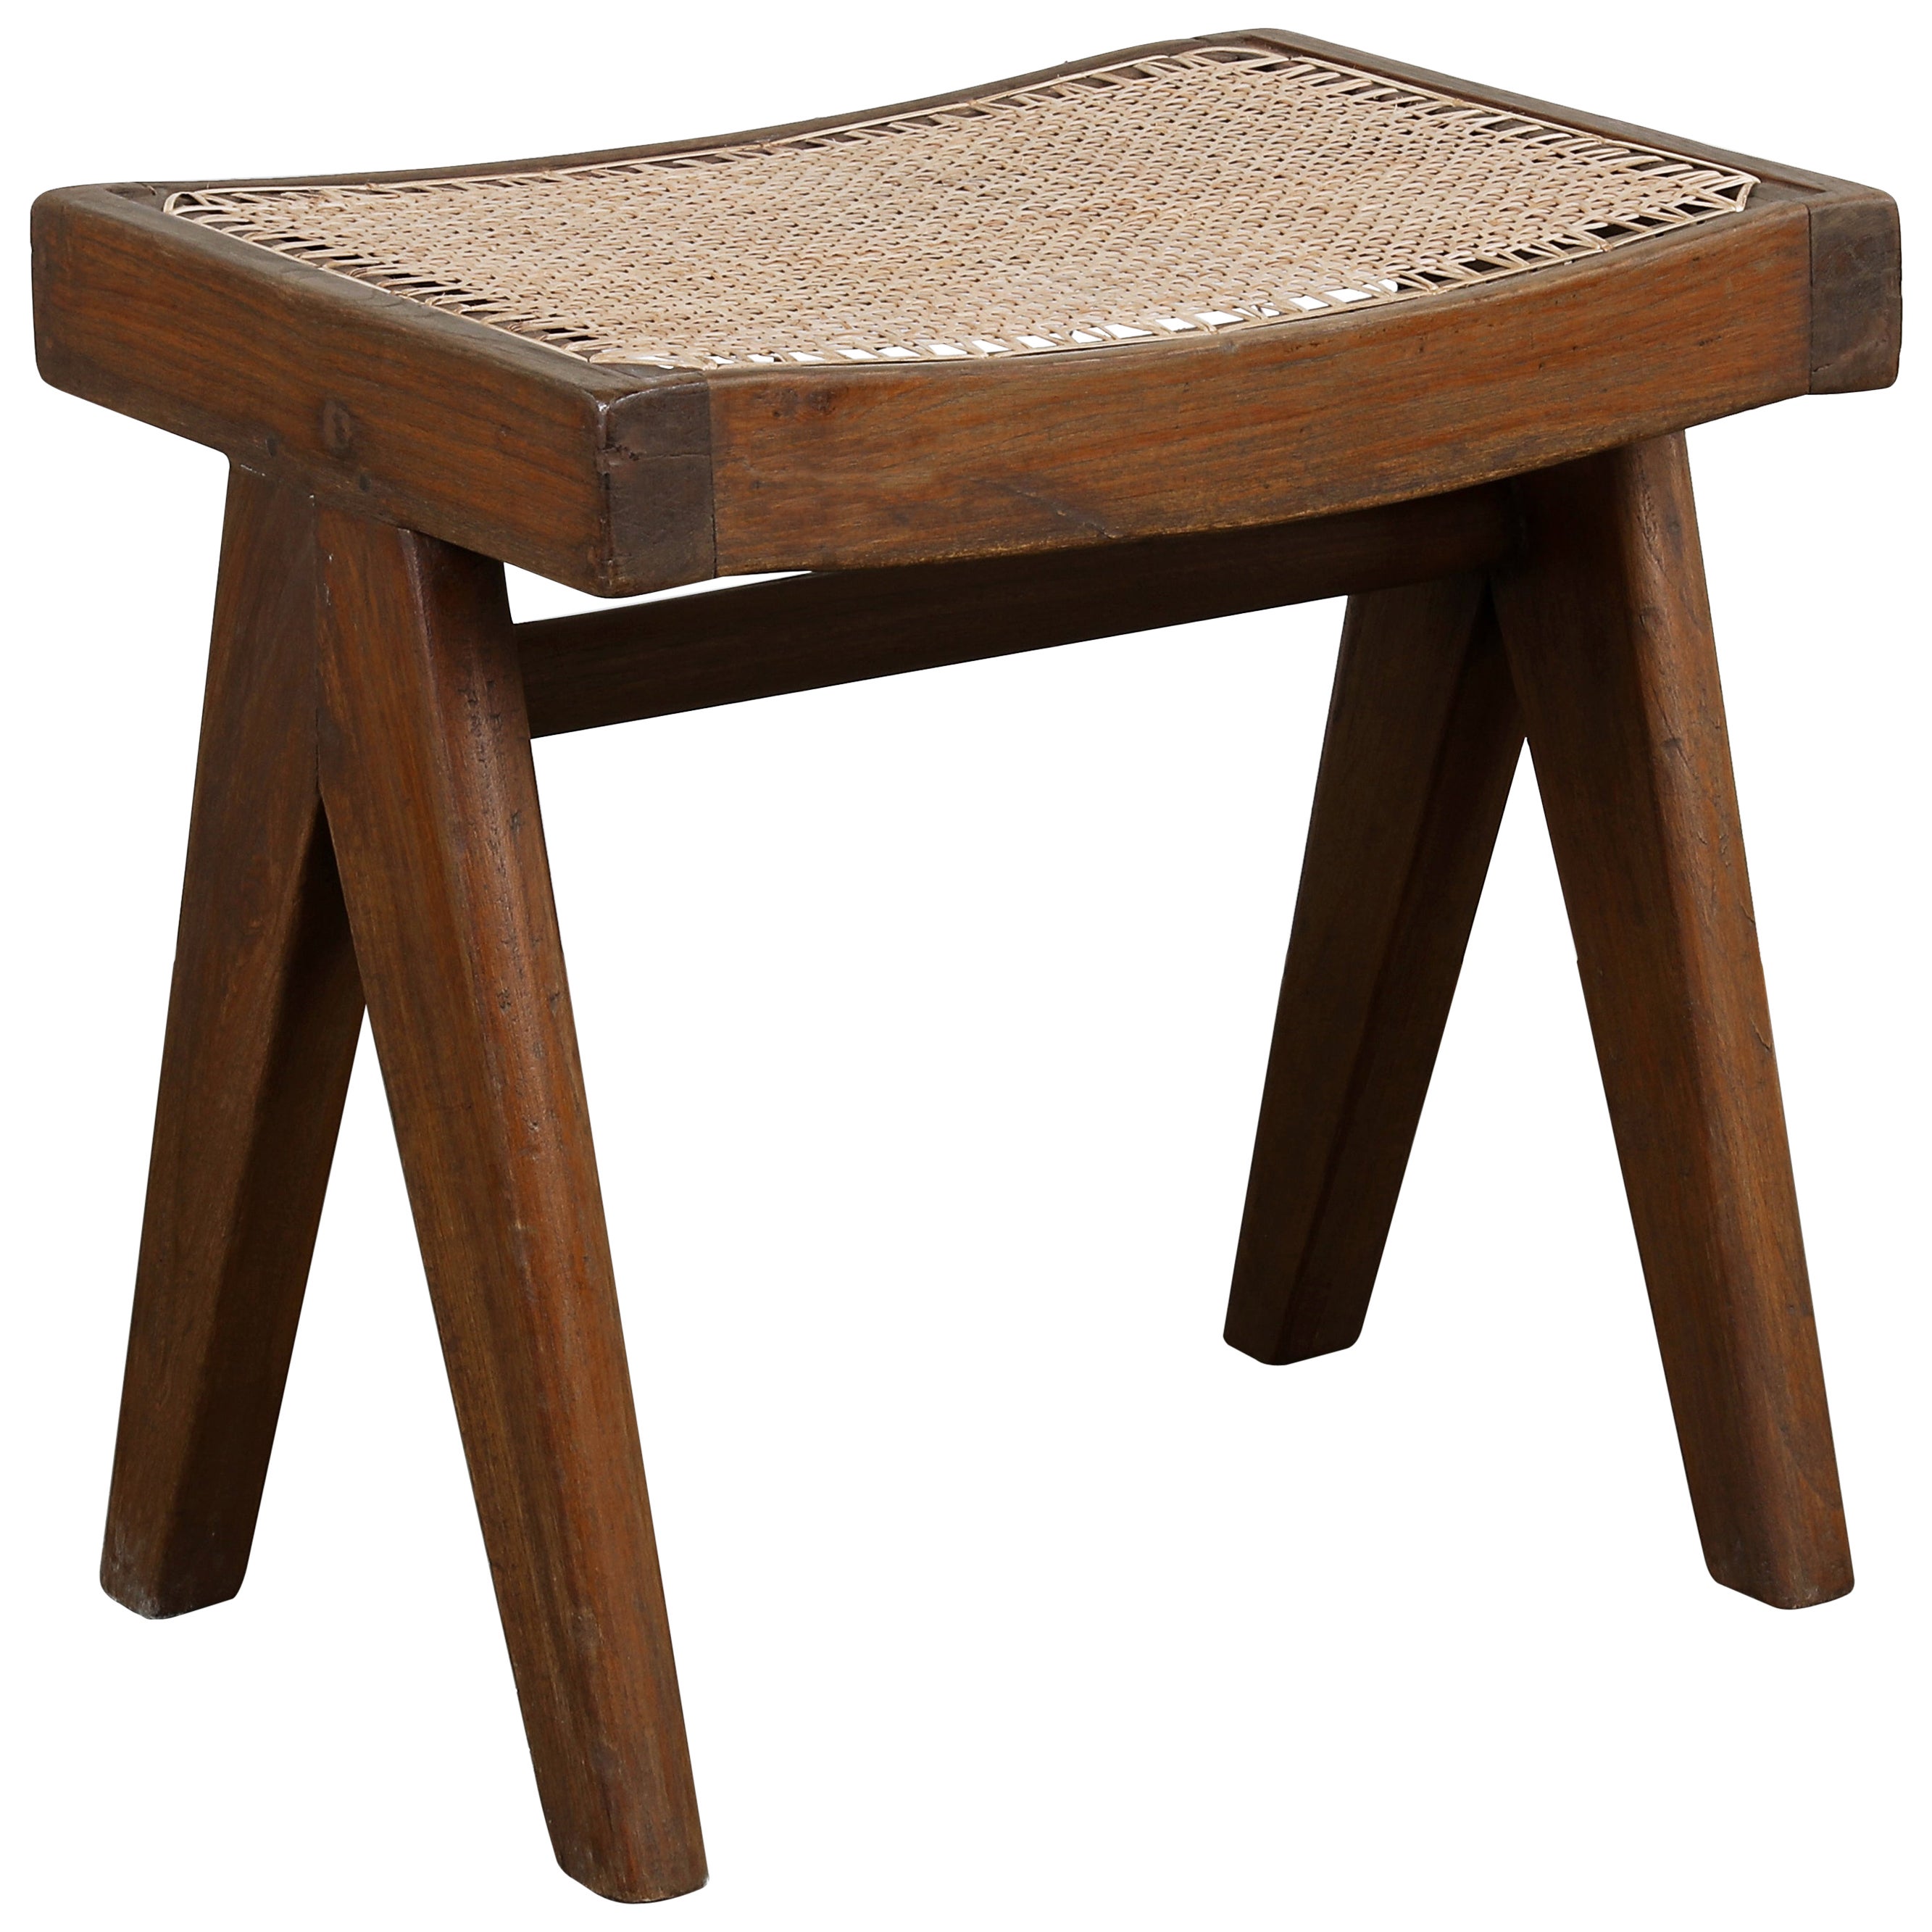 Pierre Jeanneret A-Legs Cane Stool Authentic Mid-Century Modern PJ-SI-34-A For Sale